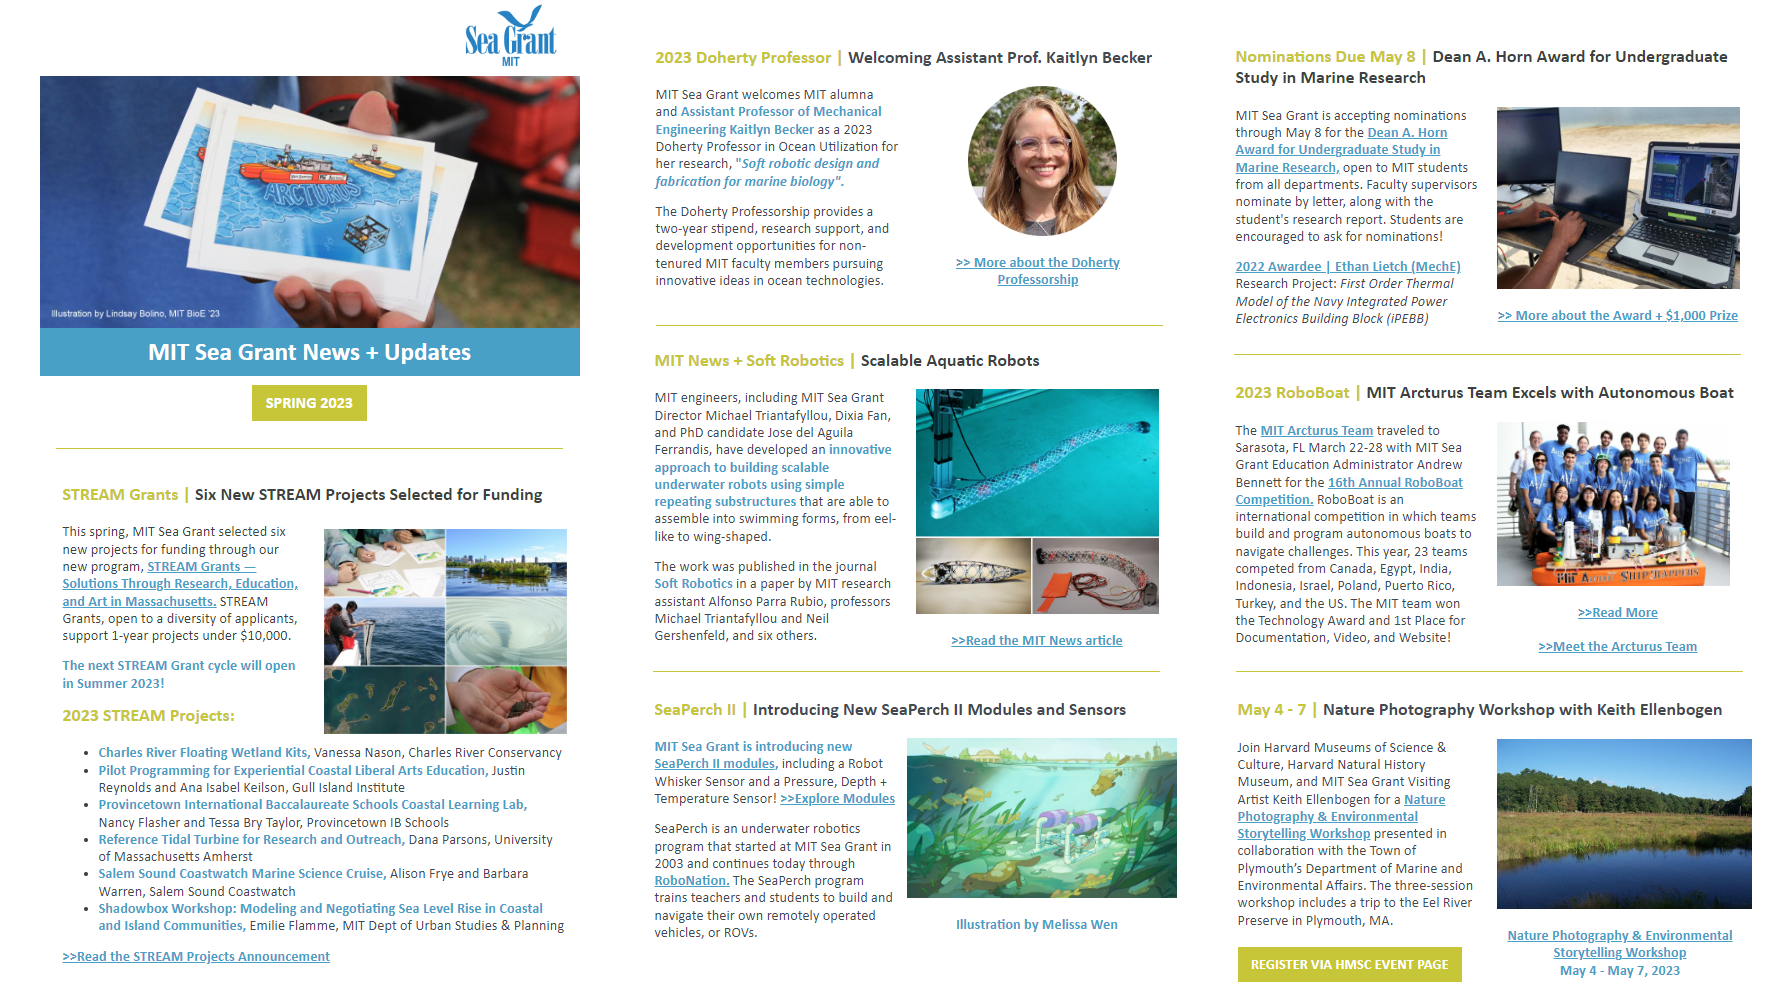 A snapshot of news and updates from MIT Sea Grant's Spring 2023 Newsletter